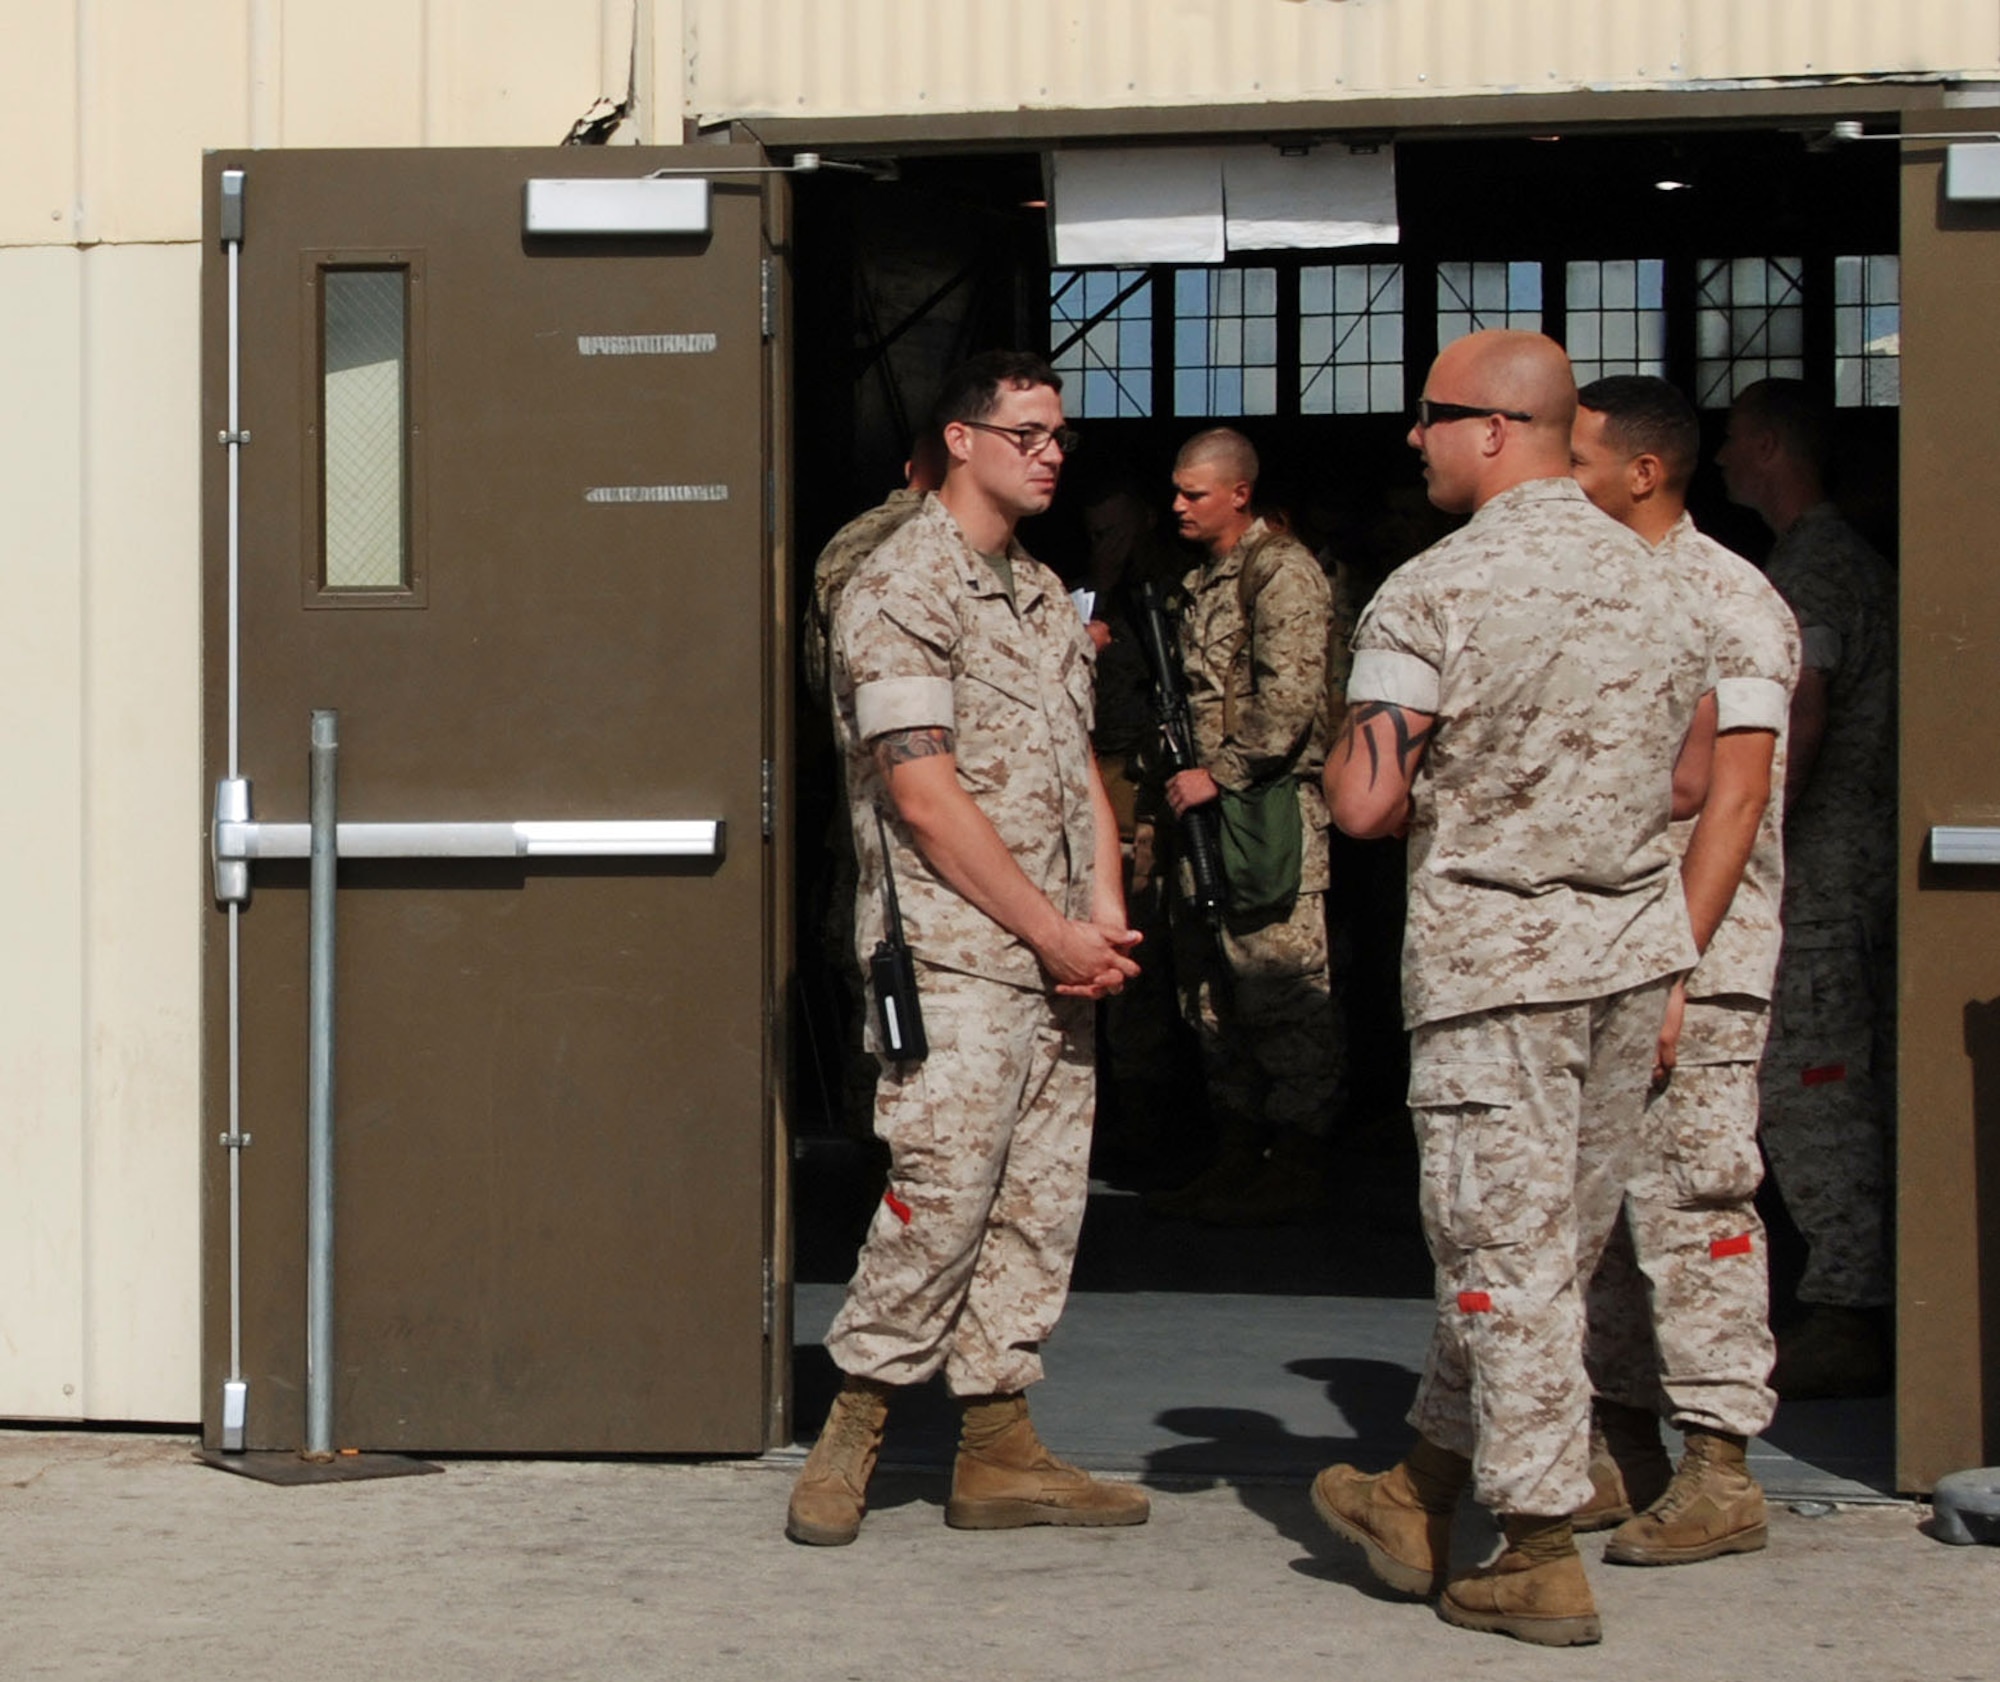 Cpl. Renold Oliver (left) talks to Cpl. Cody Kramer outside the deployment hangar at March ARB. The red patches visible on their trouser legs distinguish the Marines as landing support specialists. (U.S. Air Force photo by Megan Just)